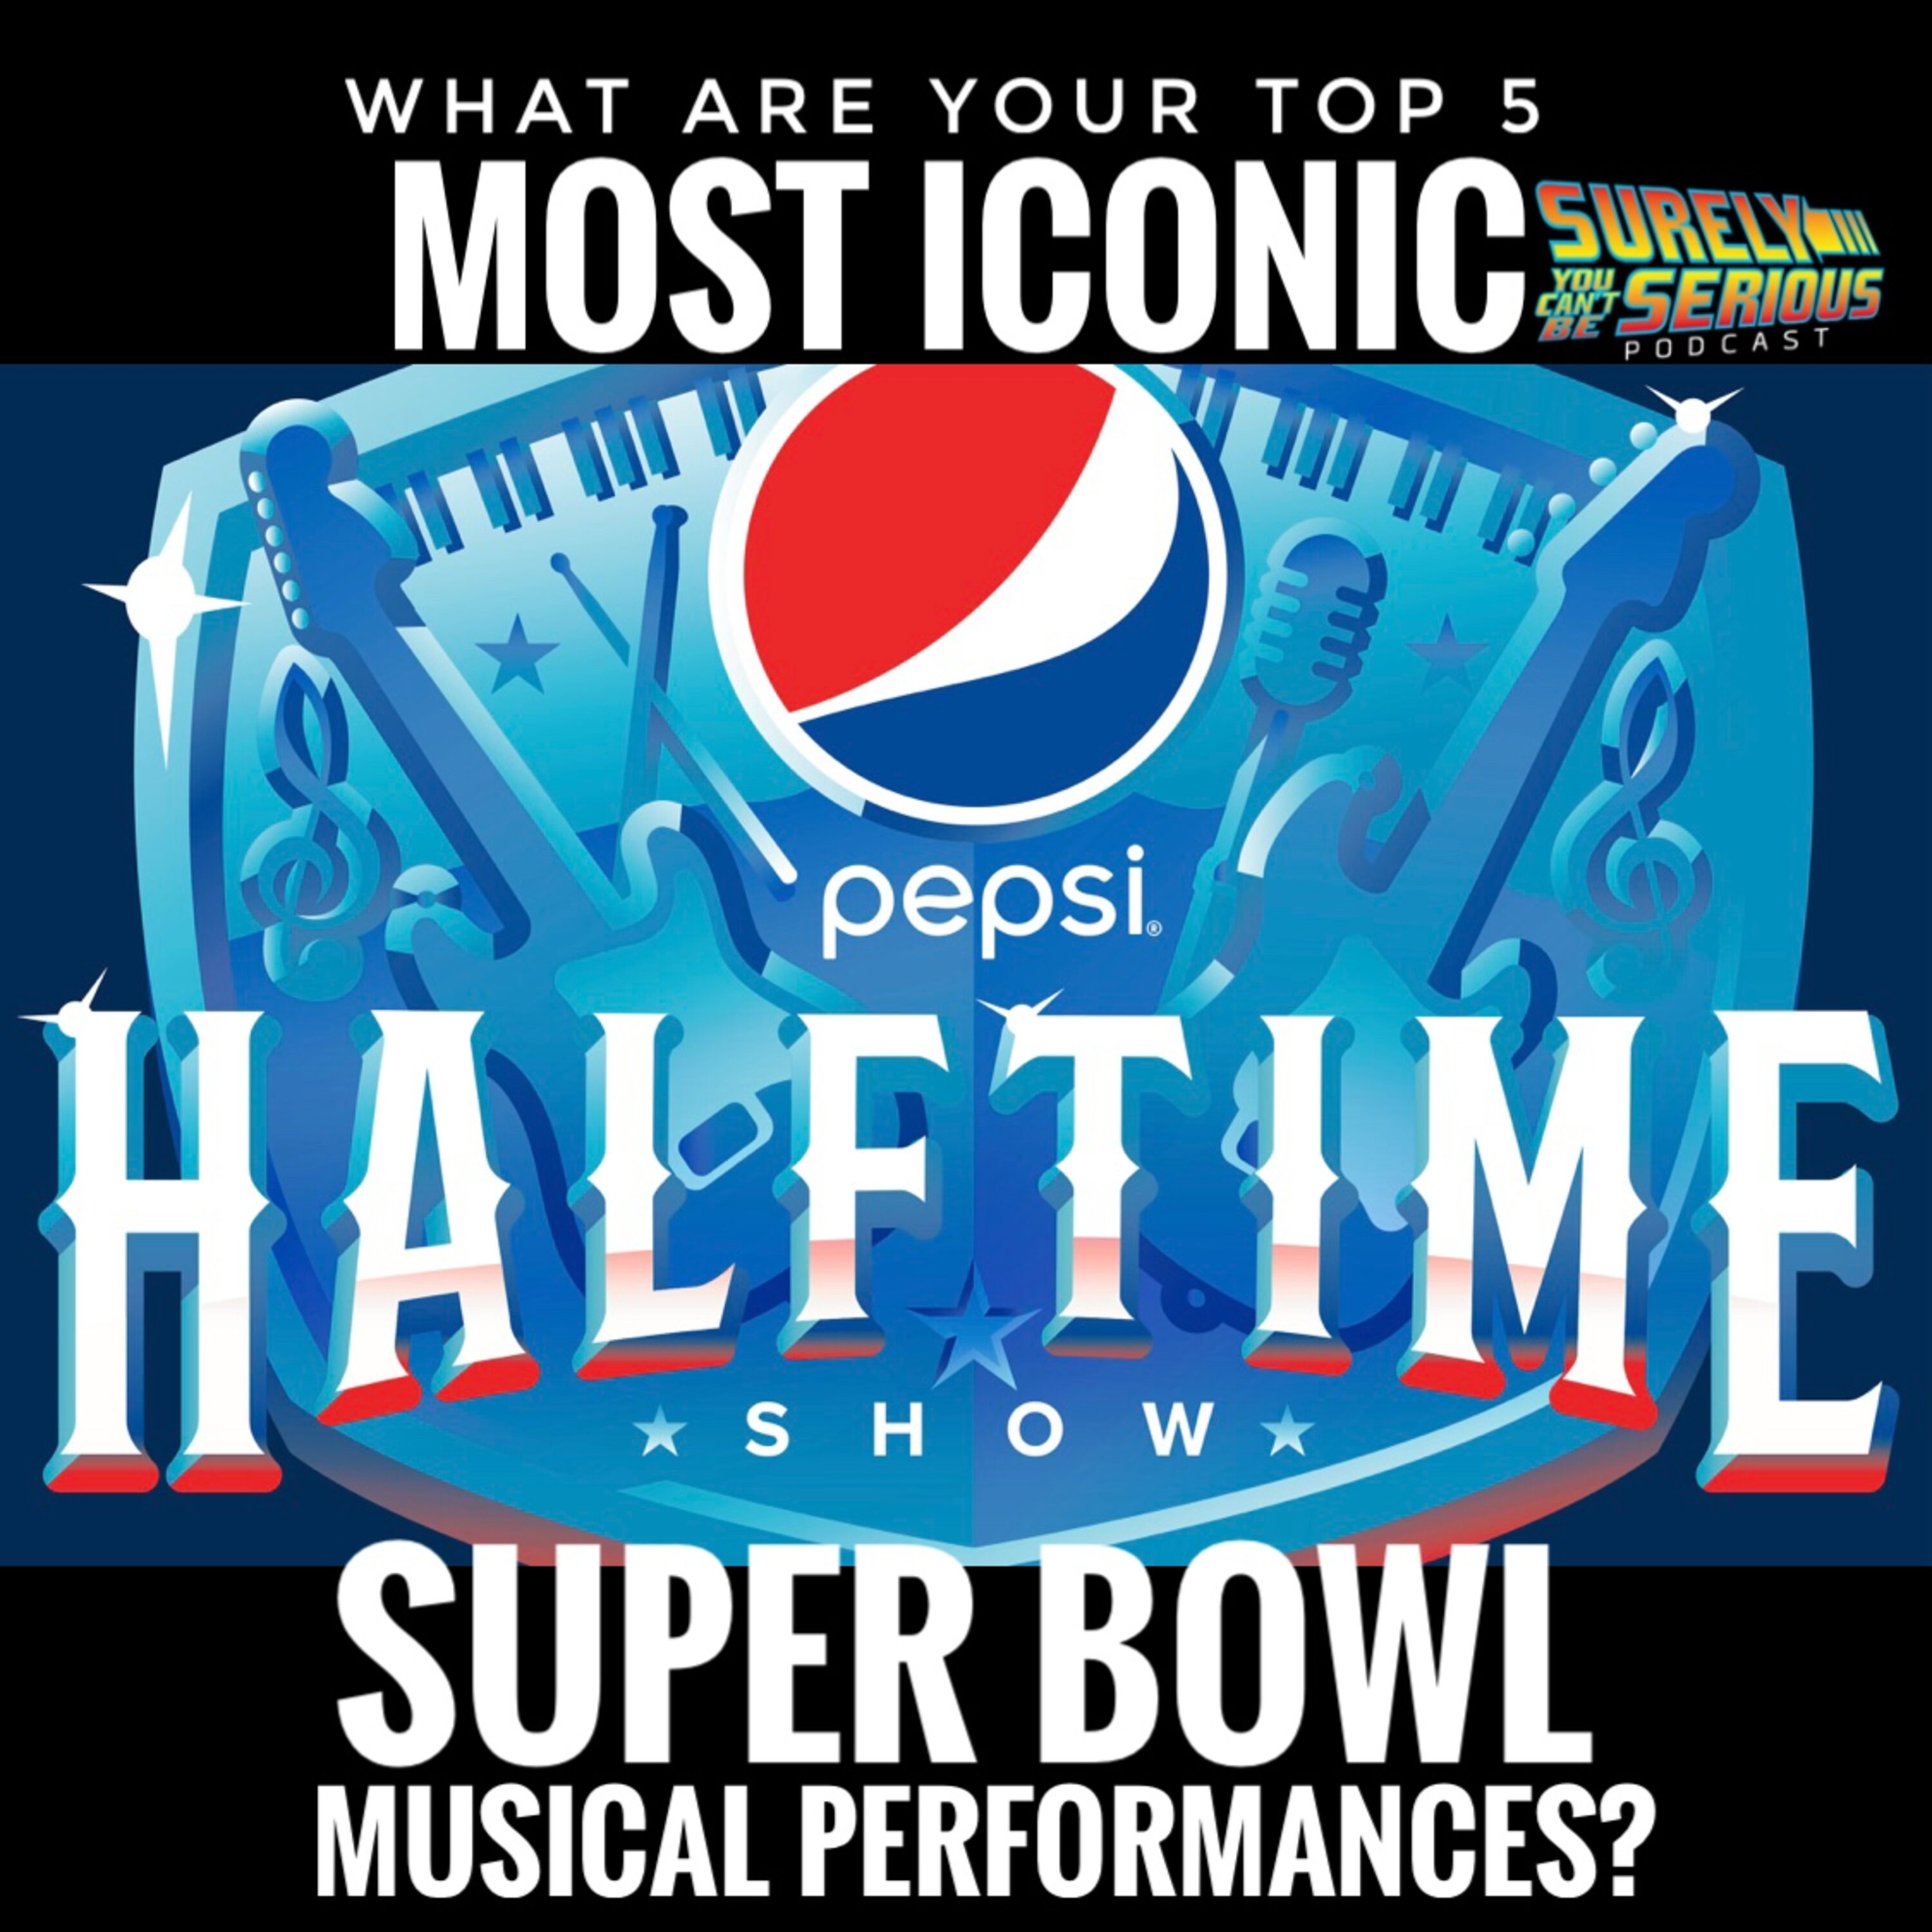 Top 5 Most Iconic Super Bowl Musical Performances!